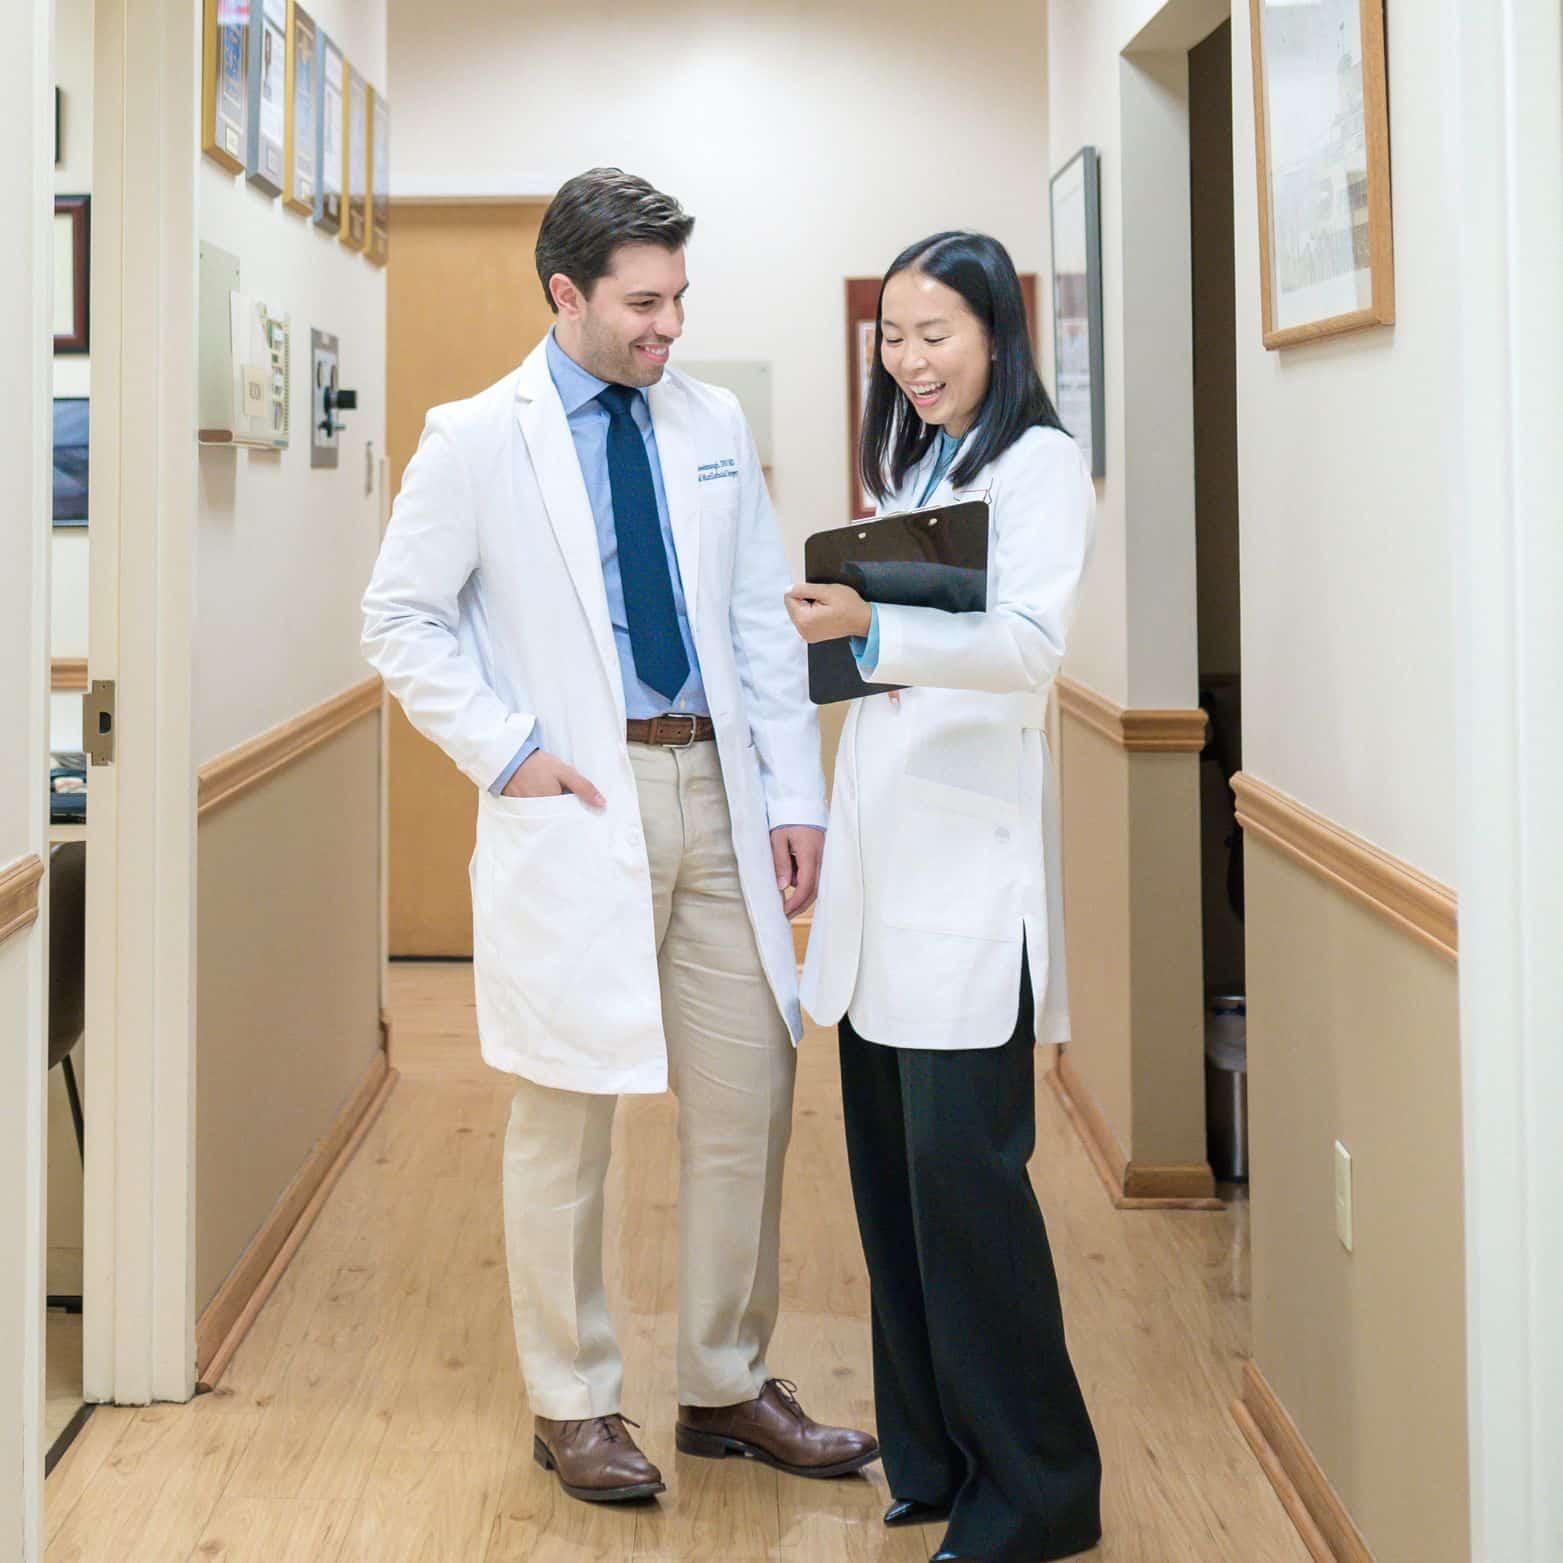 Dentists standing and talking while looking at clipboard